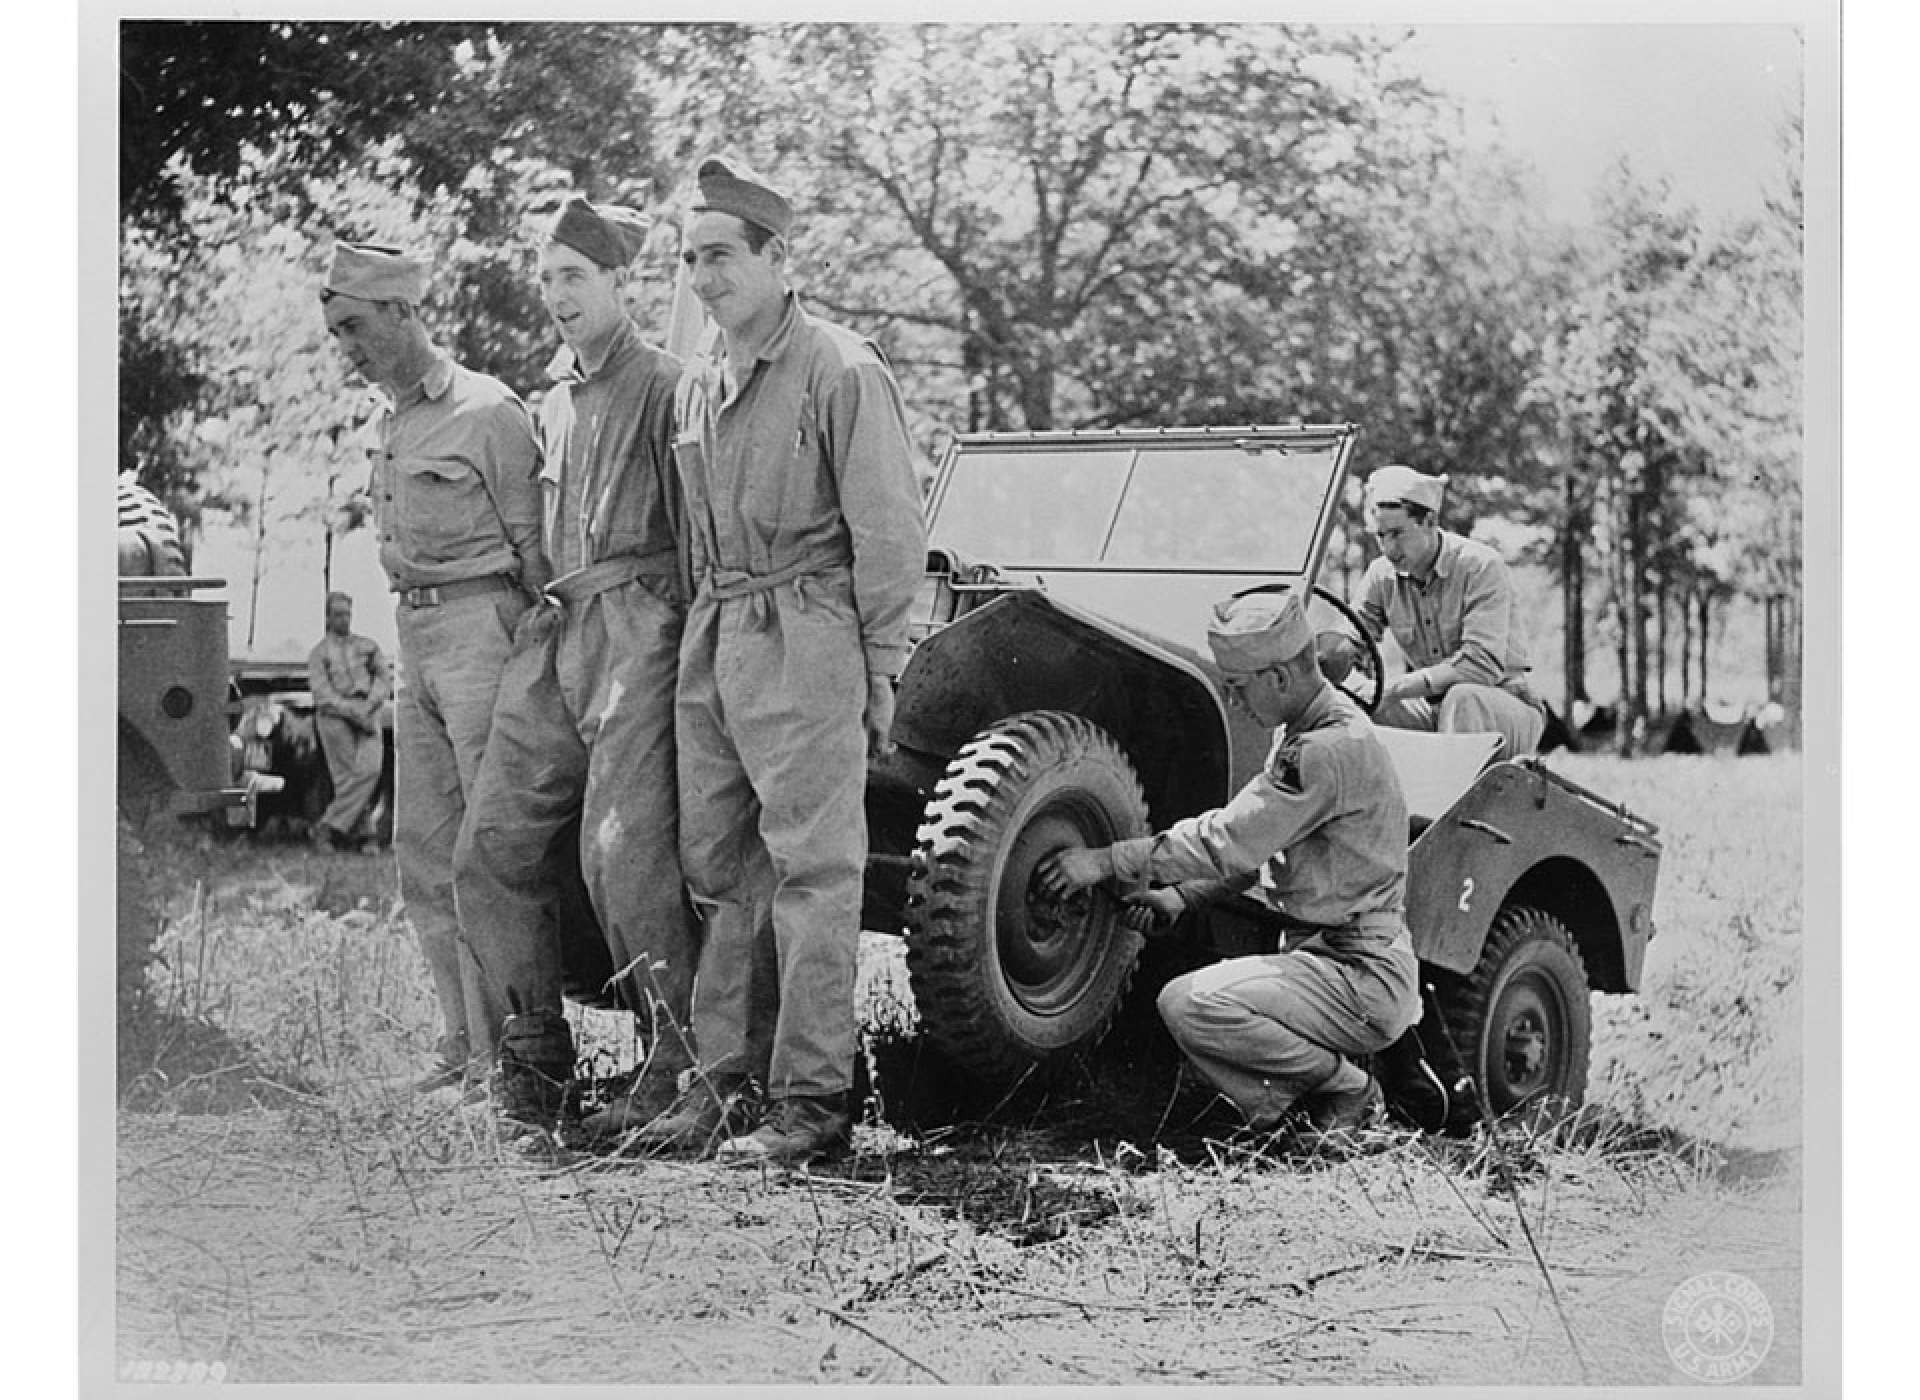 Soldiers of headquarters company of the Armored Corps lifting a jeep to repair it at their bivouac area during Second Army maneuvers, June 1941. Library of Congress